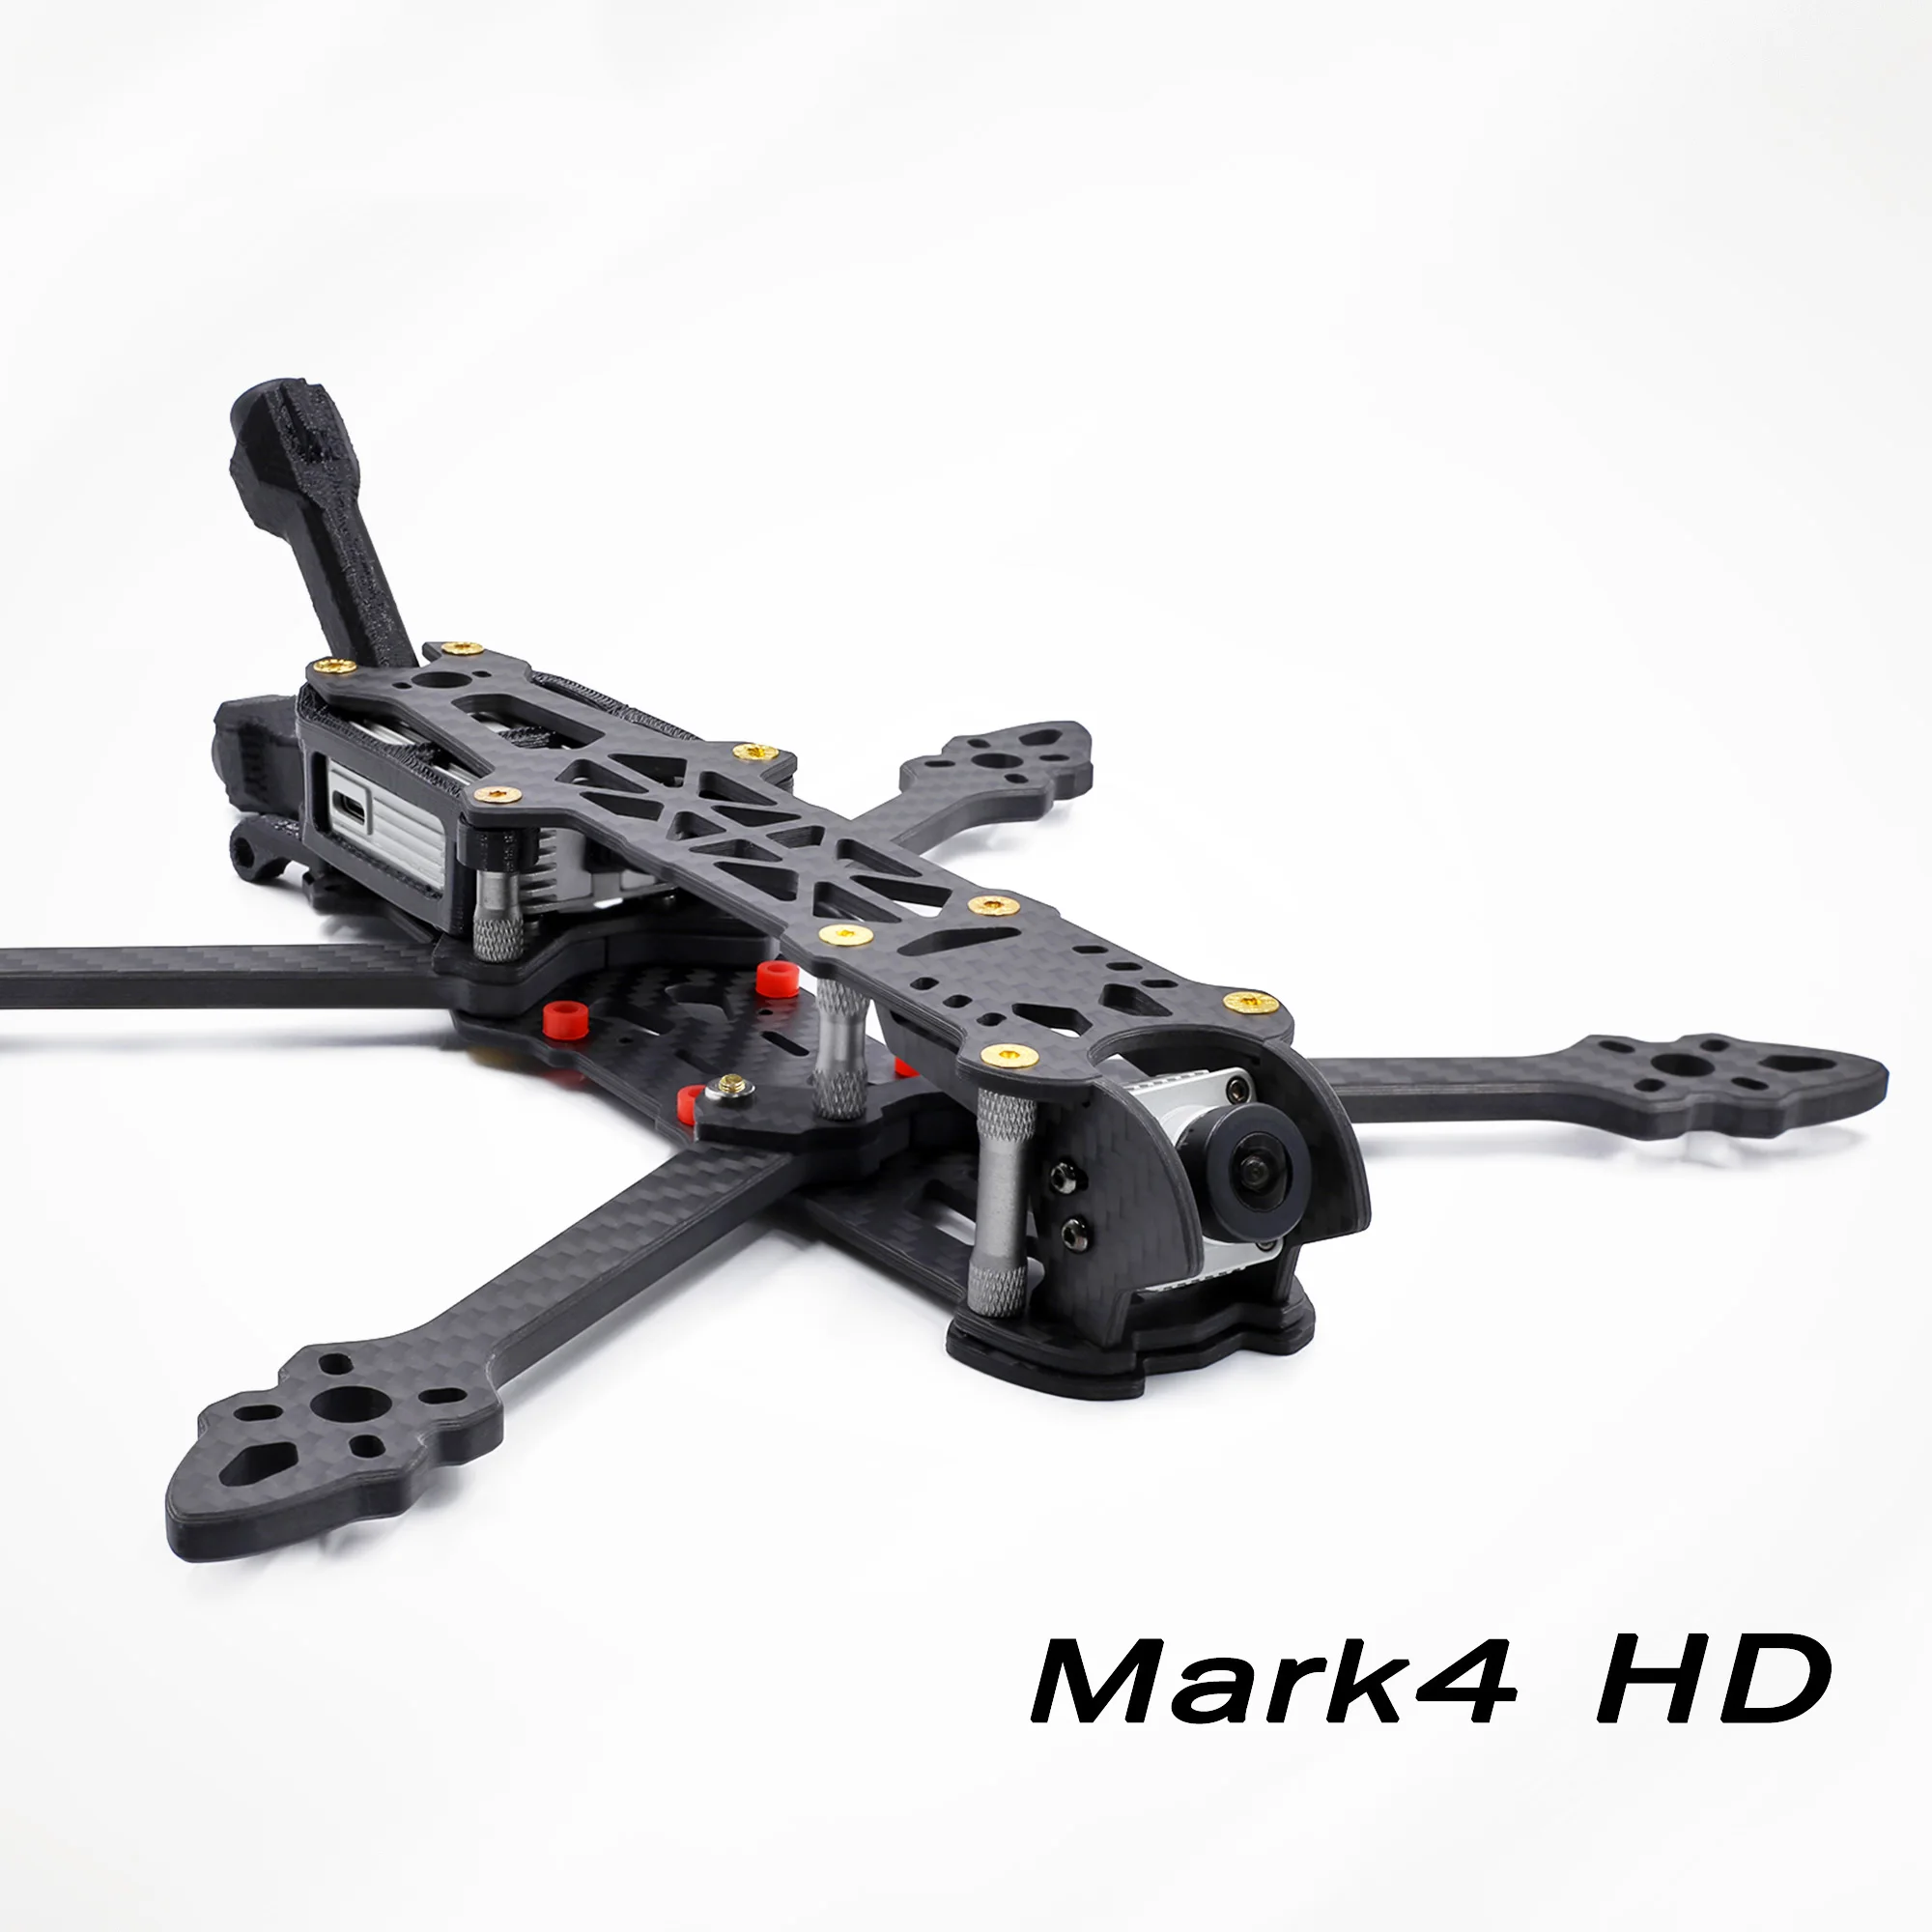 

GEPRC GEP-Mark4 HD5 5inch 224mm / HD7 7inch 295mm Carbon Fiber Freestyle Frame Kits for FPV Air Unit Freestyle Long Range